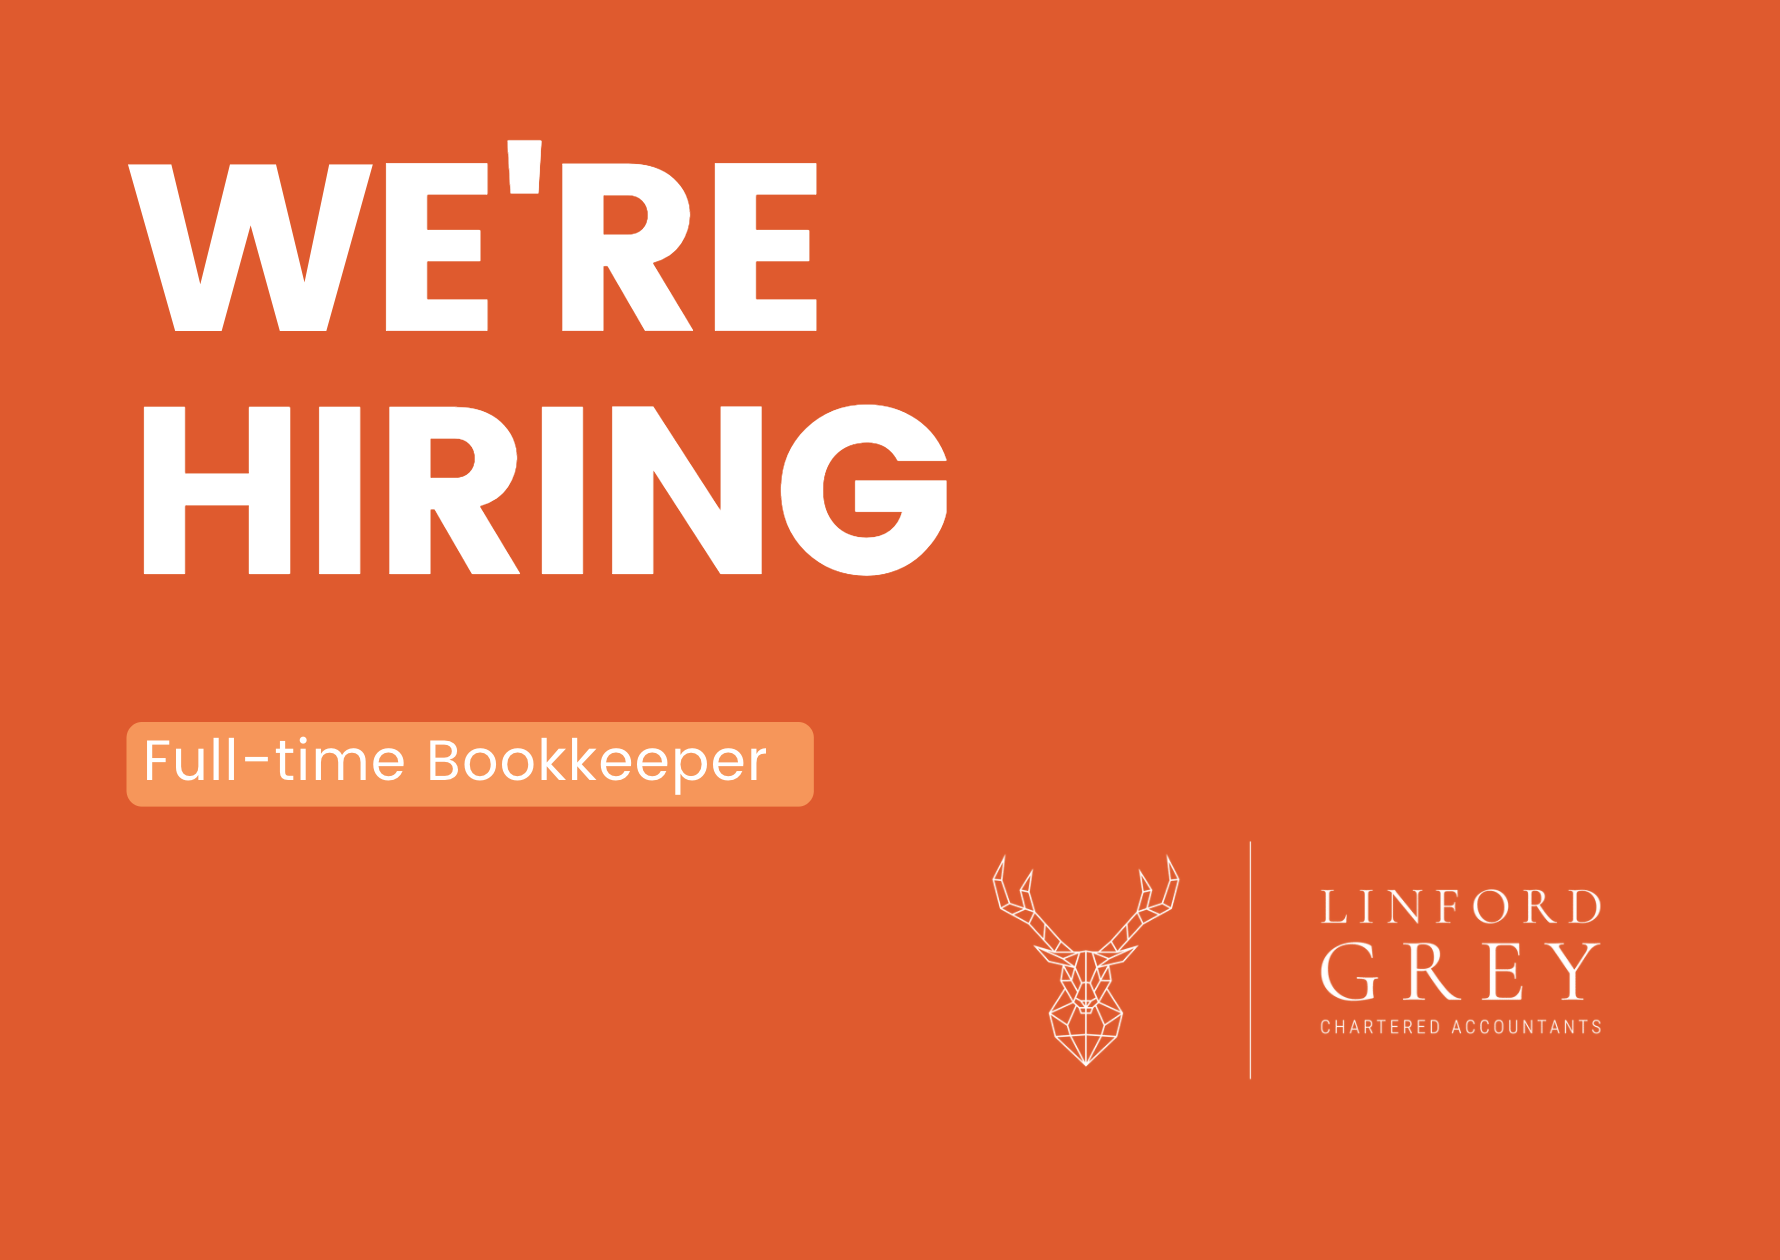 Full-time Bookkeeper Job Role